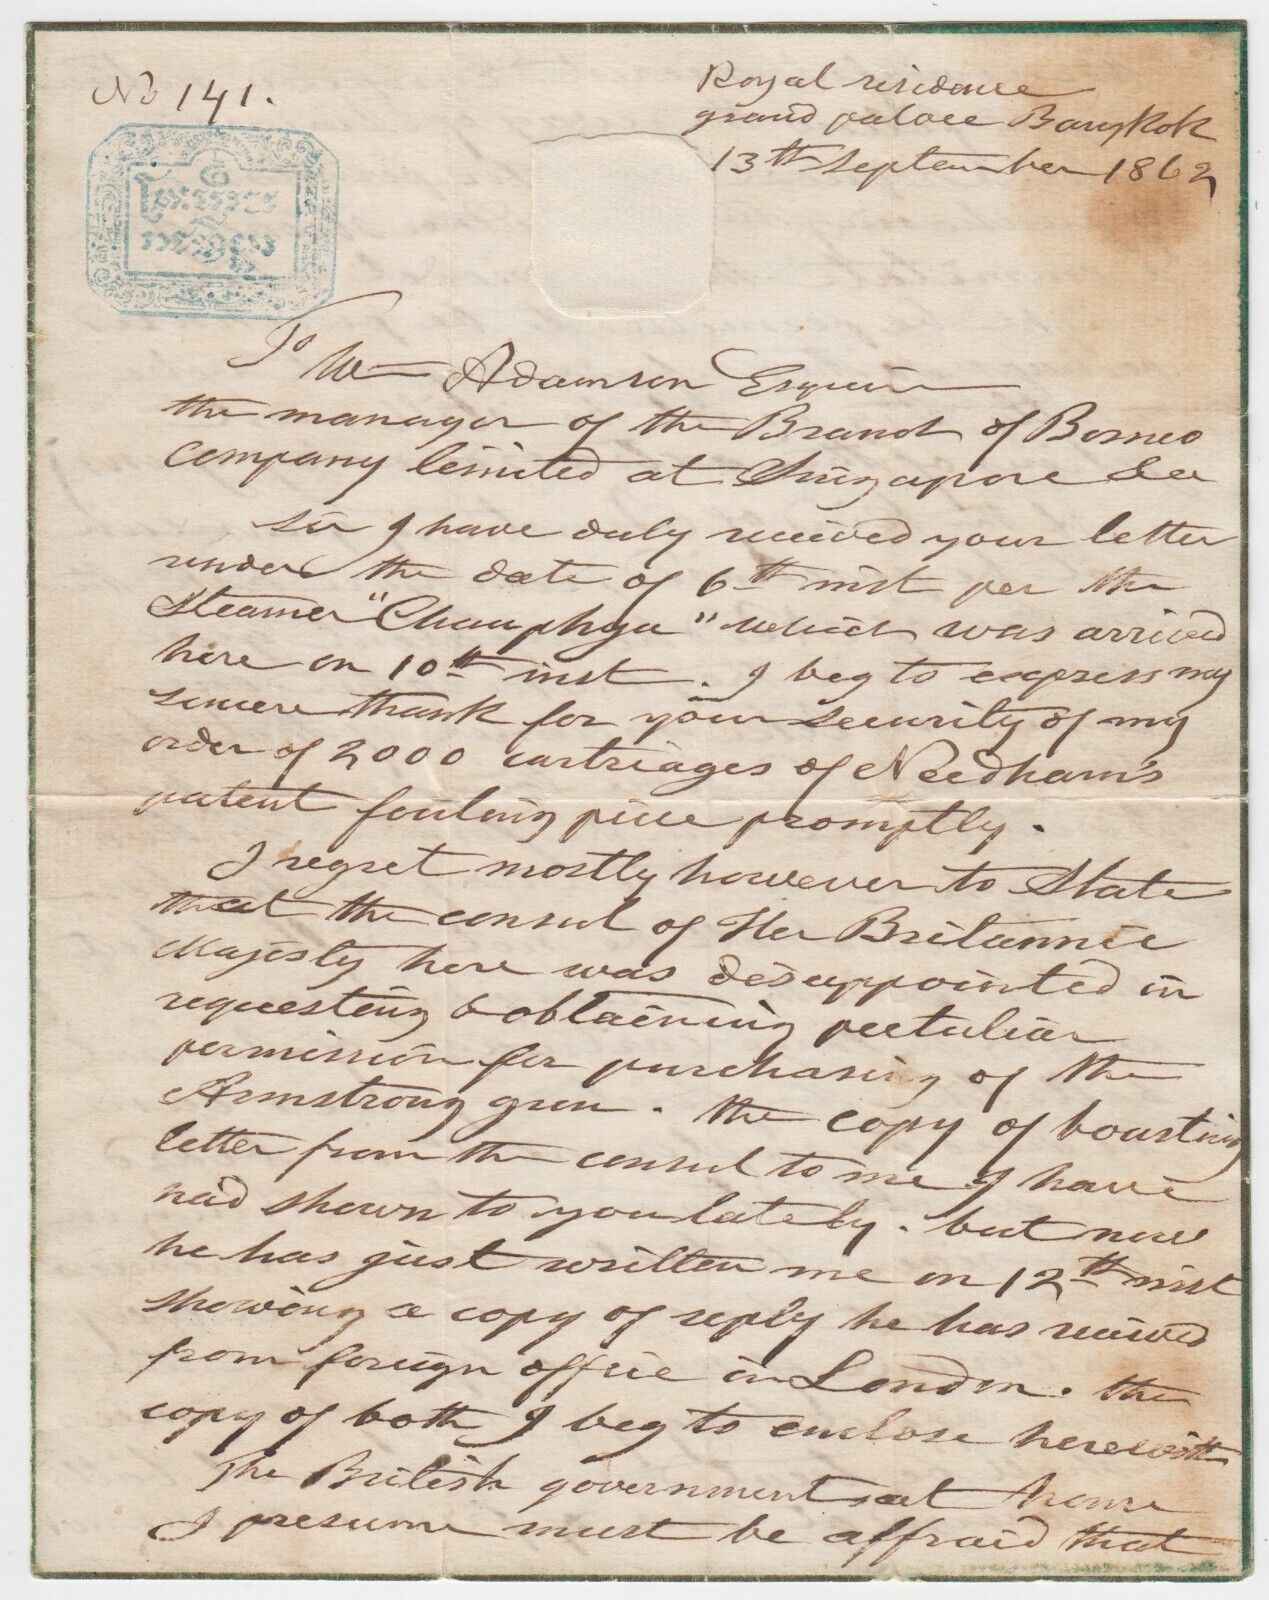 THAILAND. Mongkut, Rama IV, King of Siam. 1862 Autograph Letter